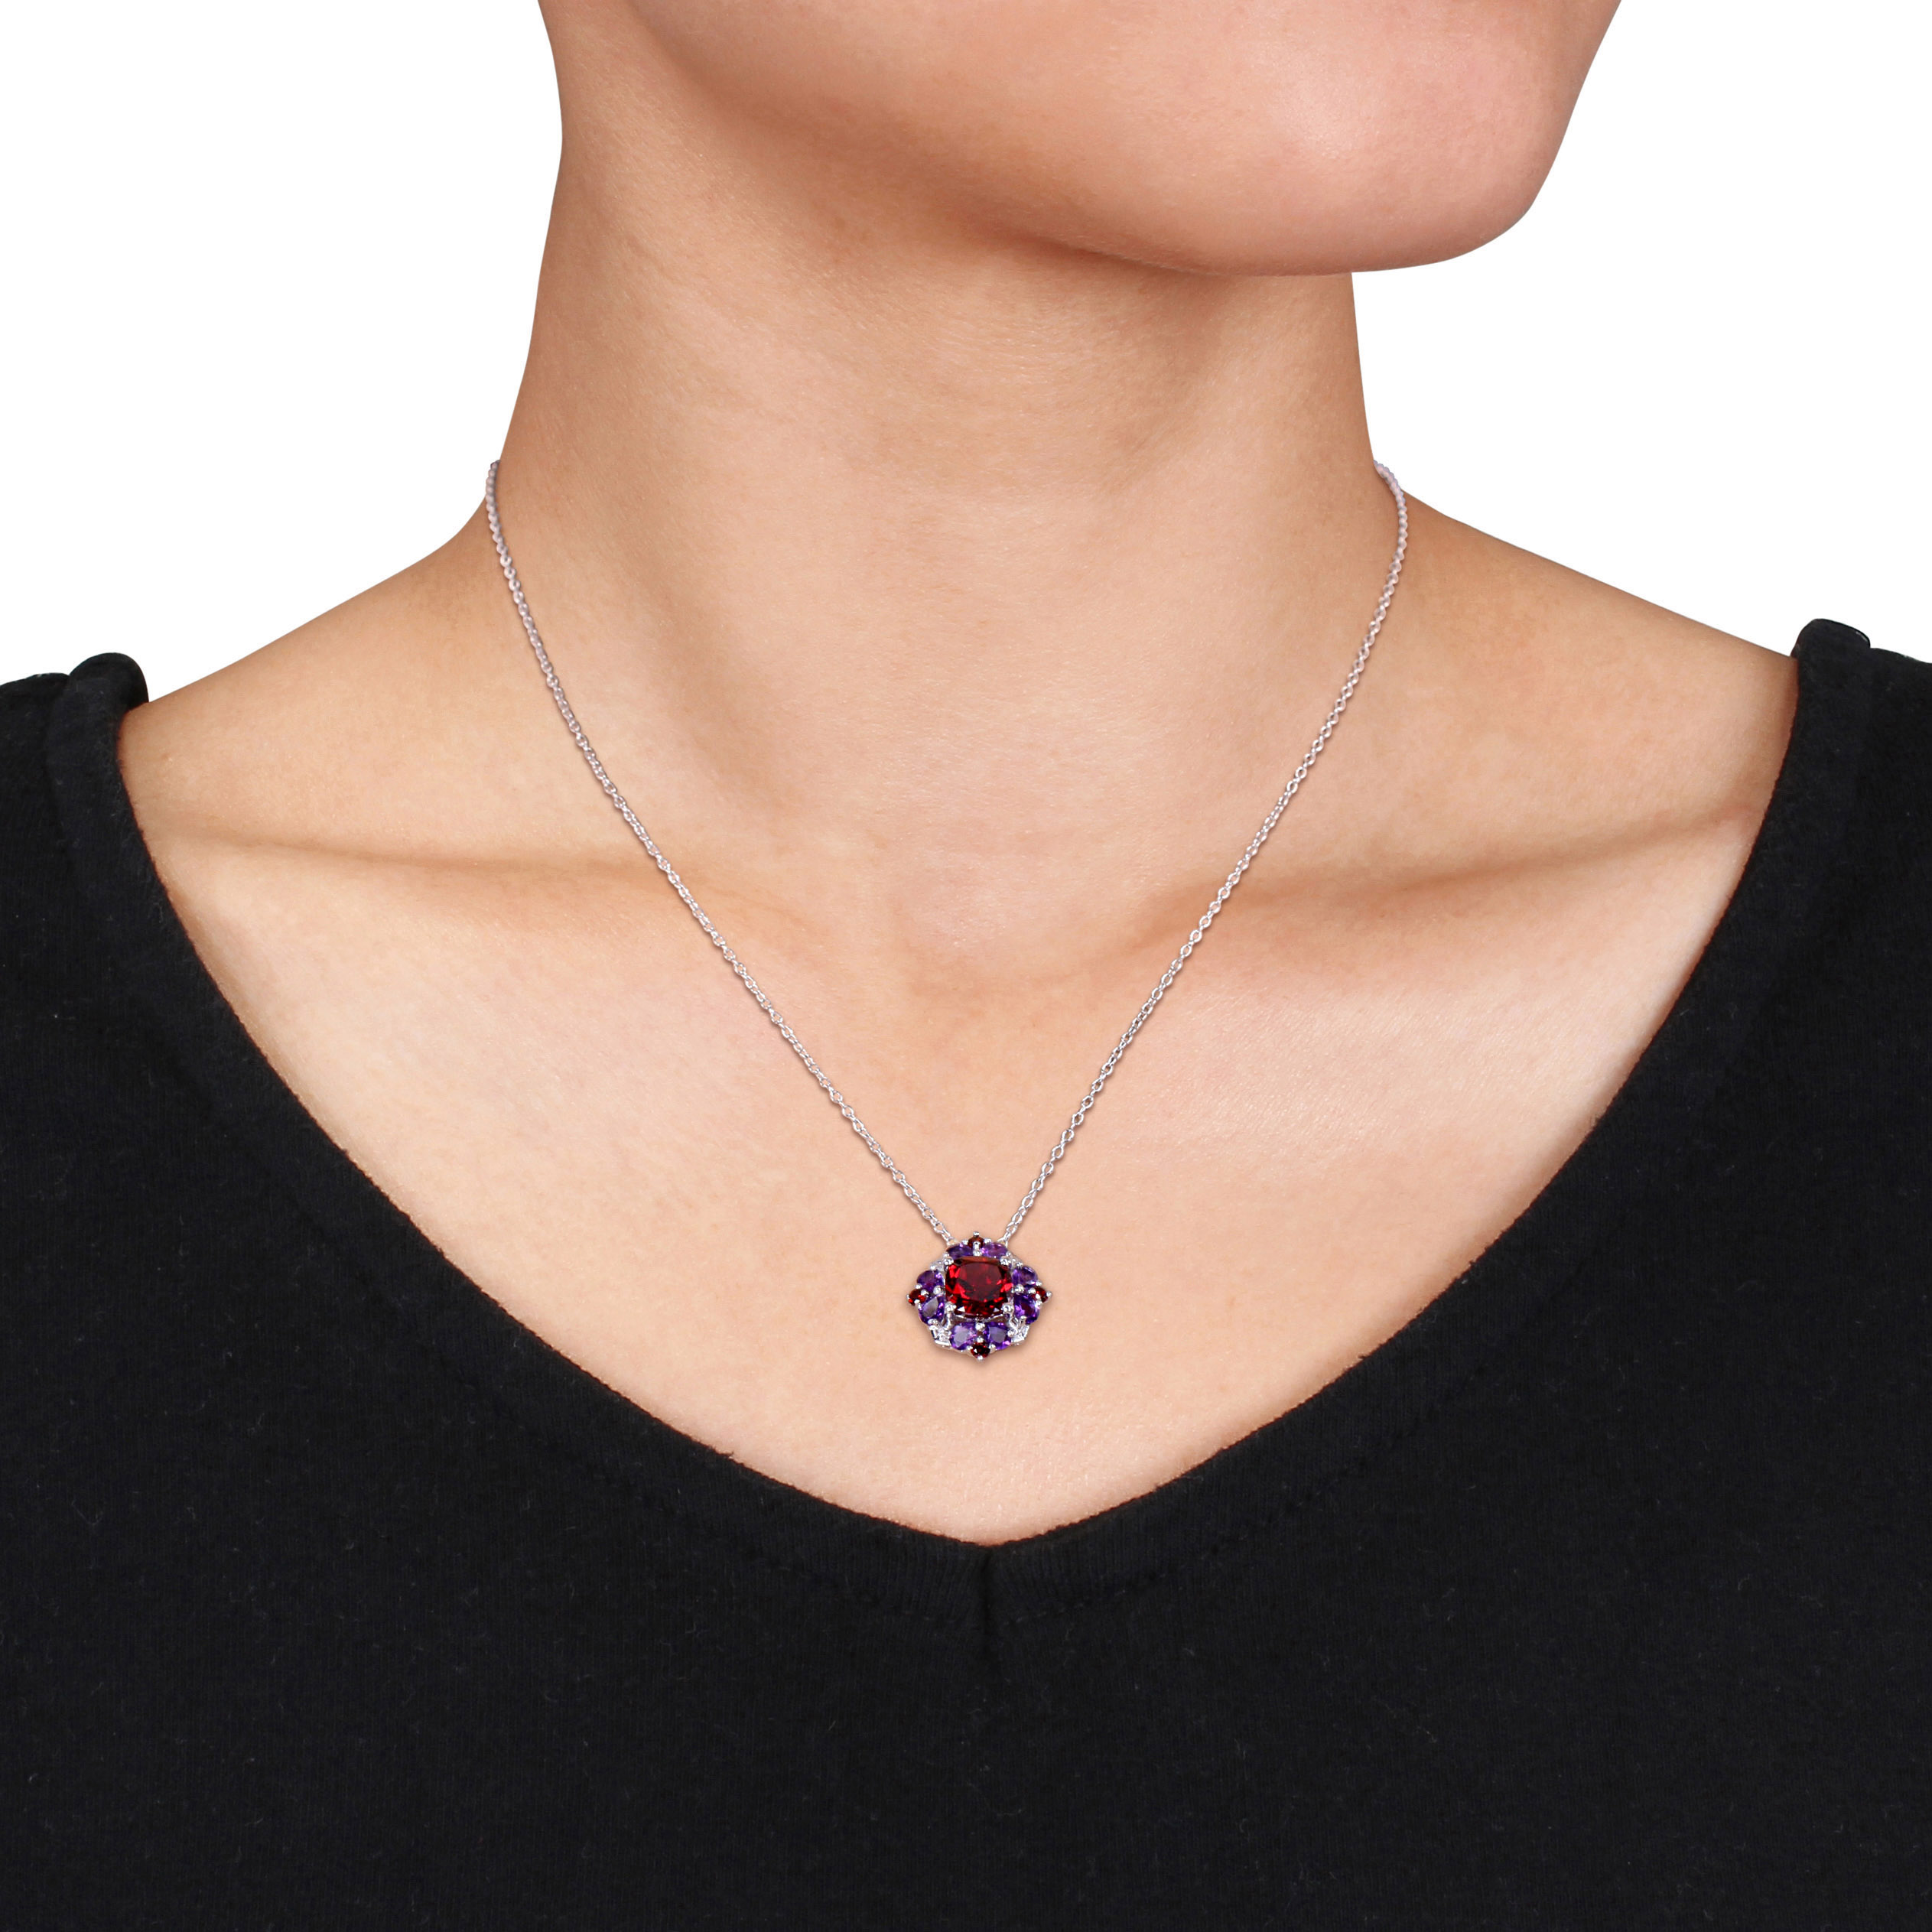 4 2/5 CT TGW Garnet and African Amethyst Quatrefoil Floral Pendant with Chain in Sterling Silver